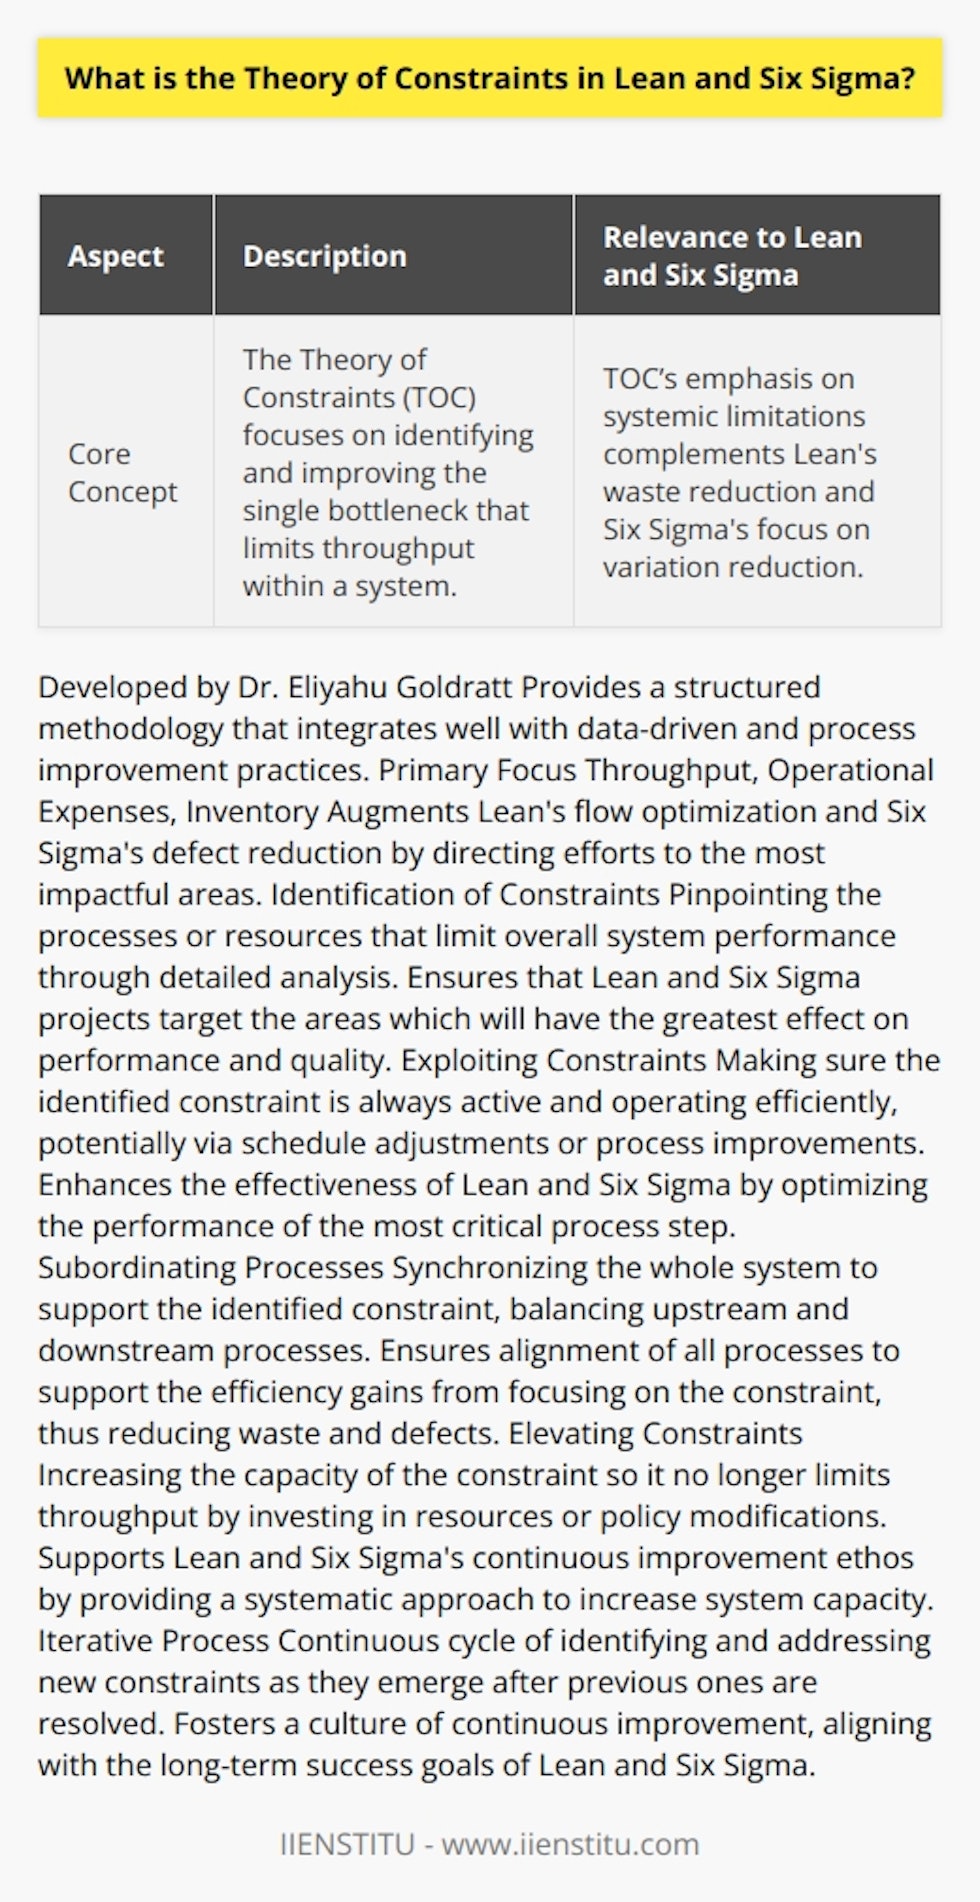 The Theory of Constraints (TOC) is a powerful management paradigm that complements Lean and Six Sigma practices by pinpointing and addressing the specific bottlenecks that hinder an organization's performance. Developed by Dr. Eliyahu Goldratt, TOC provides a systematic approach to improving organizational efficiency, with a focus on throughput, operational expenses, and inventory.In Lean initiatives, which aim to streamline operations by eliminating waste and optimizing flow, TOC can be synergistically applied to ensure that continuous improvement efforts are directed towards the most critical areas. Similarly, within Six Sigma projects, characterized by their rigorous data-driven approach to reducing variations and defects, TOC can guide practitioners to concentrate on constraints that, once resolved, will have the most profound impact on process quality and capability.The process of integrating TOC in Lean and Six Sigma starts with the identification of constraints. These are the processes or resources that limit the system's ability to achieve higher performance, often referred to as bottlenecks. Detailed analysis of workflow and process data is necessary to accurately pinpoint these constraints.Having identified a constraint, organizations must focus on exploiting it to its fullest potential. This means making sure that the constraint is never idle and is functioning as efficiently as possible. Techniques could involve adjusting schedules, work-in-process and raw material levels, and the application of targeted process improvements.With the constraint operating optimally, it's essential to synchronize the entire system to support the constraint. This step, known as subordinating other processes to the constraint, ensures that upstream and downstream processes are balanced in a way that they do not overburden the constraint with too much work or starve it of work.When the constraint is functioning at peak efficiency and the system has been aligned to support it, the focus shifts to elevating the constraint. This step involves increasing the capacity of the constraint so that it no longer acts as the limiting factor to throughput. This could involve investing in new equipment, adding shifts, cross-training employees, or modifying policies.As TOC is a dynamic approach, once a constraint is elevated and is no longer the limiting factor, another constraint will likely appear. TOC is an ongoing, iterative process where identification, exploitation, subordination, and elevation steps are repeatedly applied. This cyclical process fosters a culture of continuous improvement and helps sustain the gains from Lean and Six Sigma initiatives.Integrating TOC into Lean and Six Sigma practices enhances the effectiveness and efficiency of organizational processes. The focused attention on constraints ensures that improvement efforts yield significant and sustainable results, thereby maximizing value for customers and driving long-term success.In conclusion, the Theory of Constraints is a vital methodology for organizations seeking to refine operational productivity in conjunction with Lean and Six Sigma frameworks. By concentrating on the systemic limitations and incrementally improving them, the TOC approach ensures a strategic pathway to operational excellence and customer satisfaction.